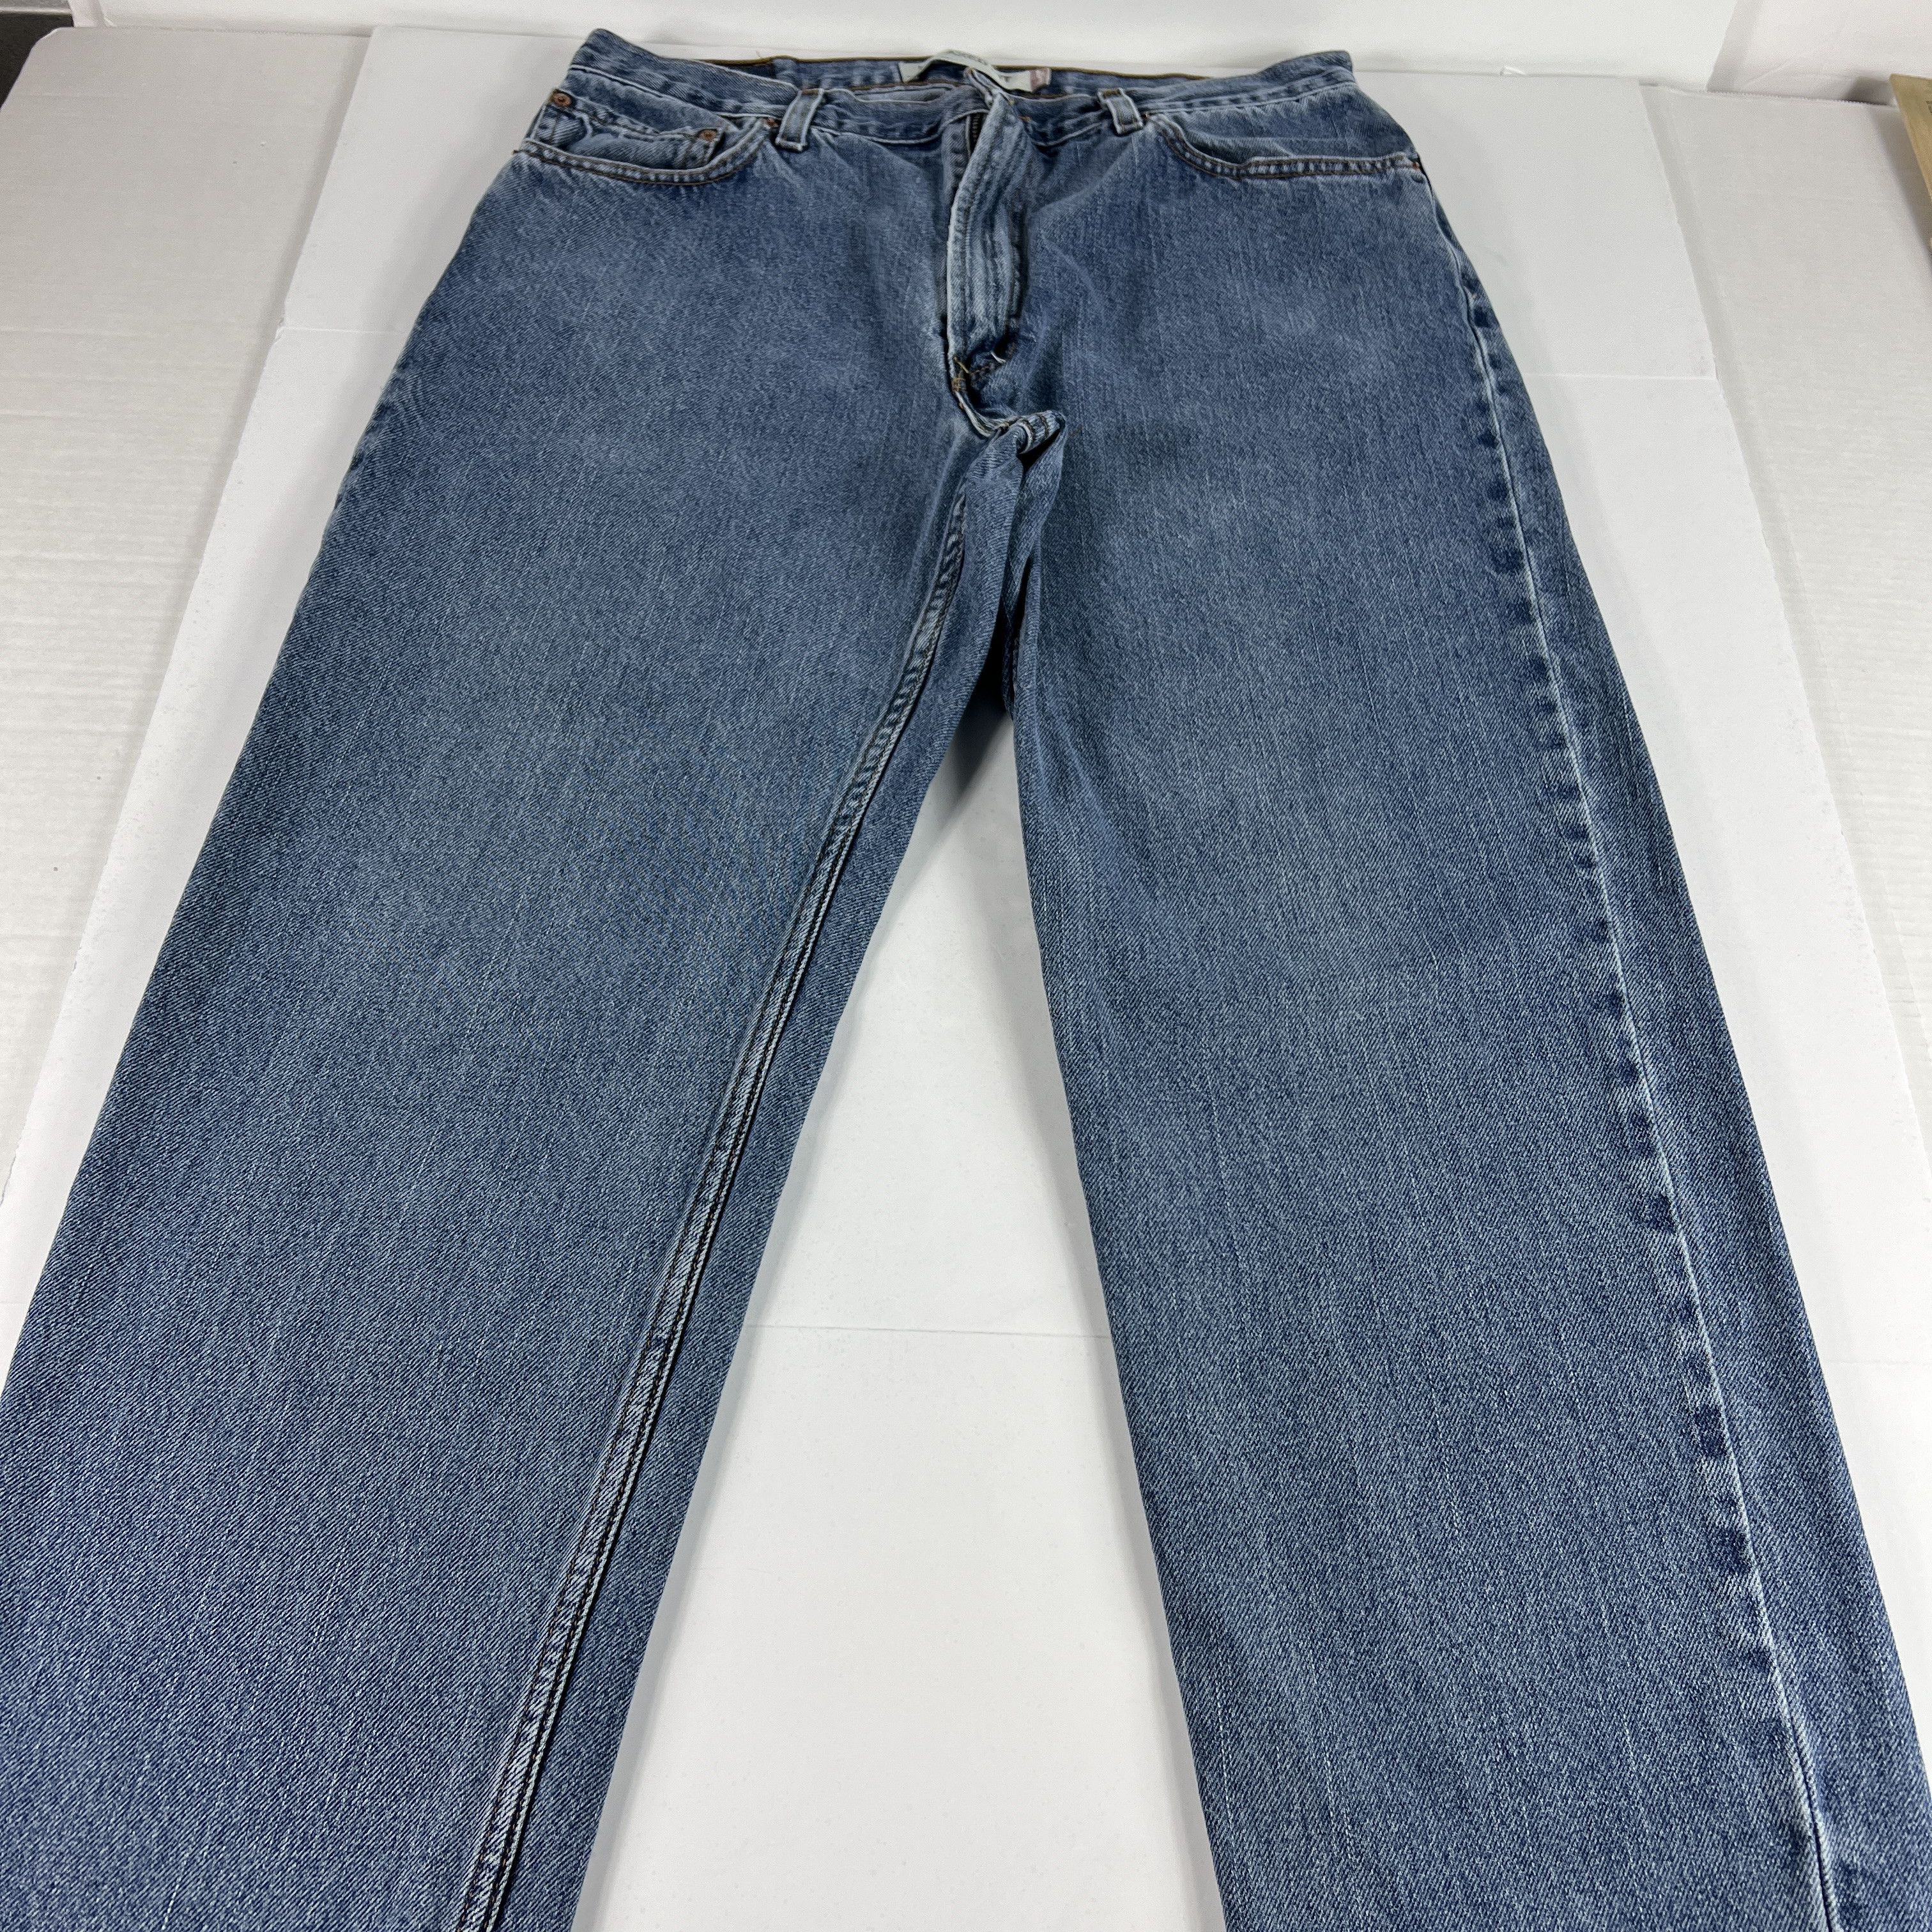 Levi's Y2K Levi's Jean 550 Relaxed Straight Blue Faded Cotton Denim Size US 34 / EU 50 - 1 Preview